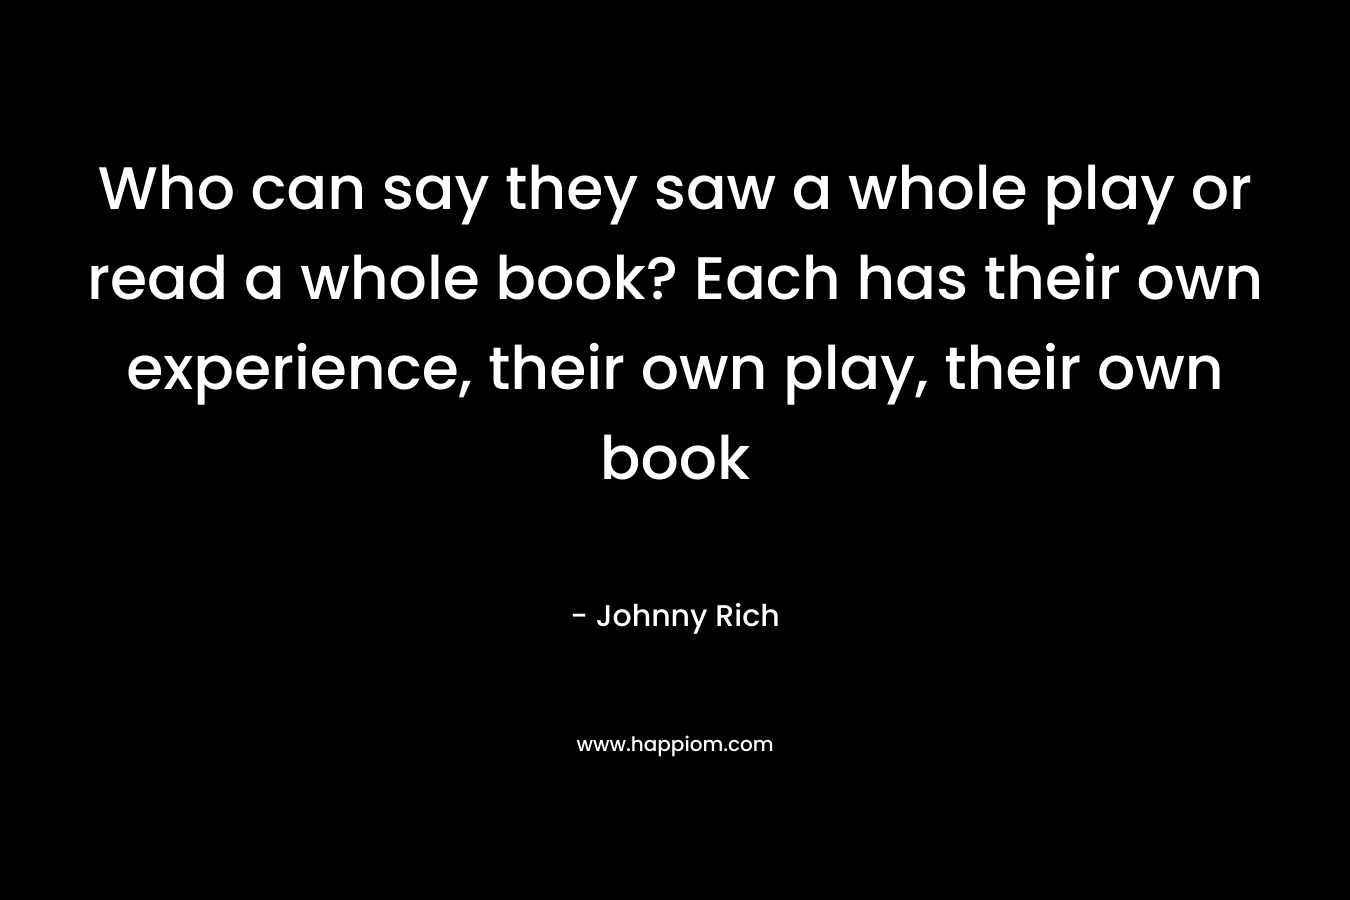 Who can say they saw a whole play or read a whole book? Each has their own experience, their own play, their own book